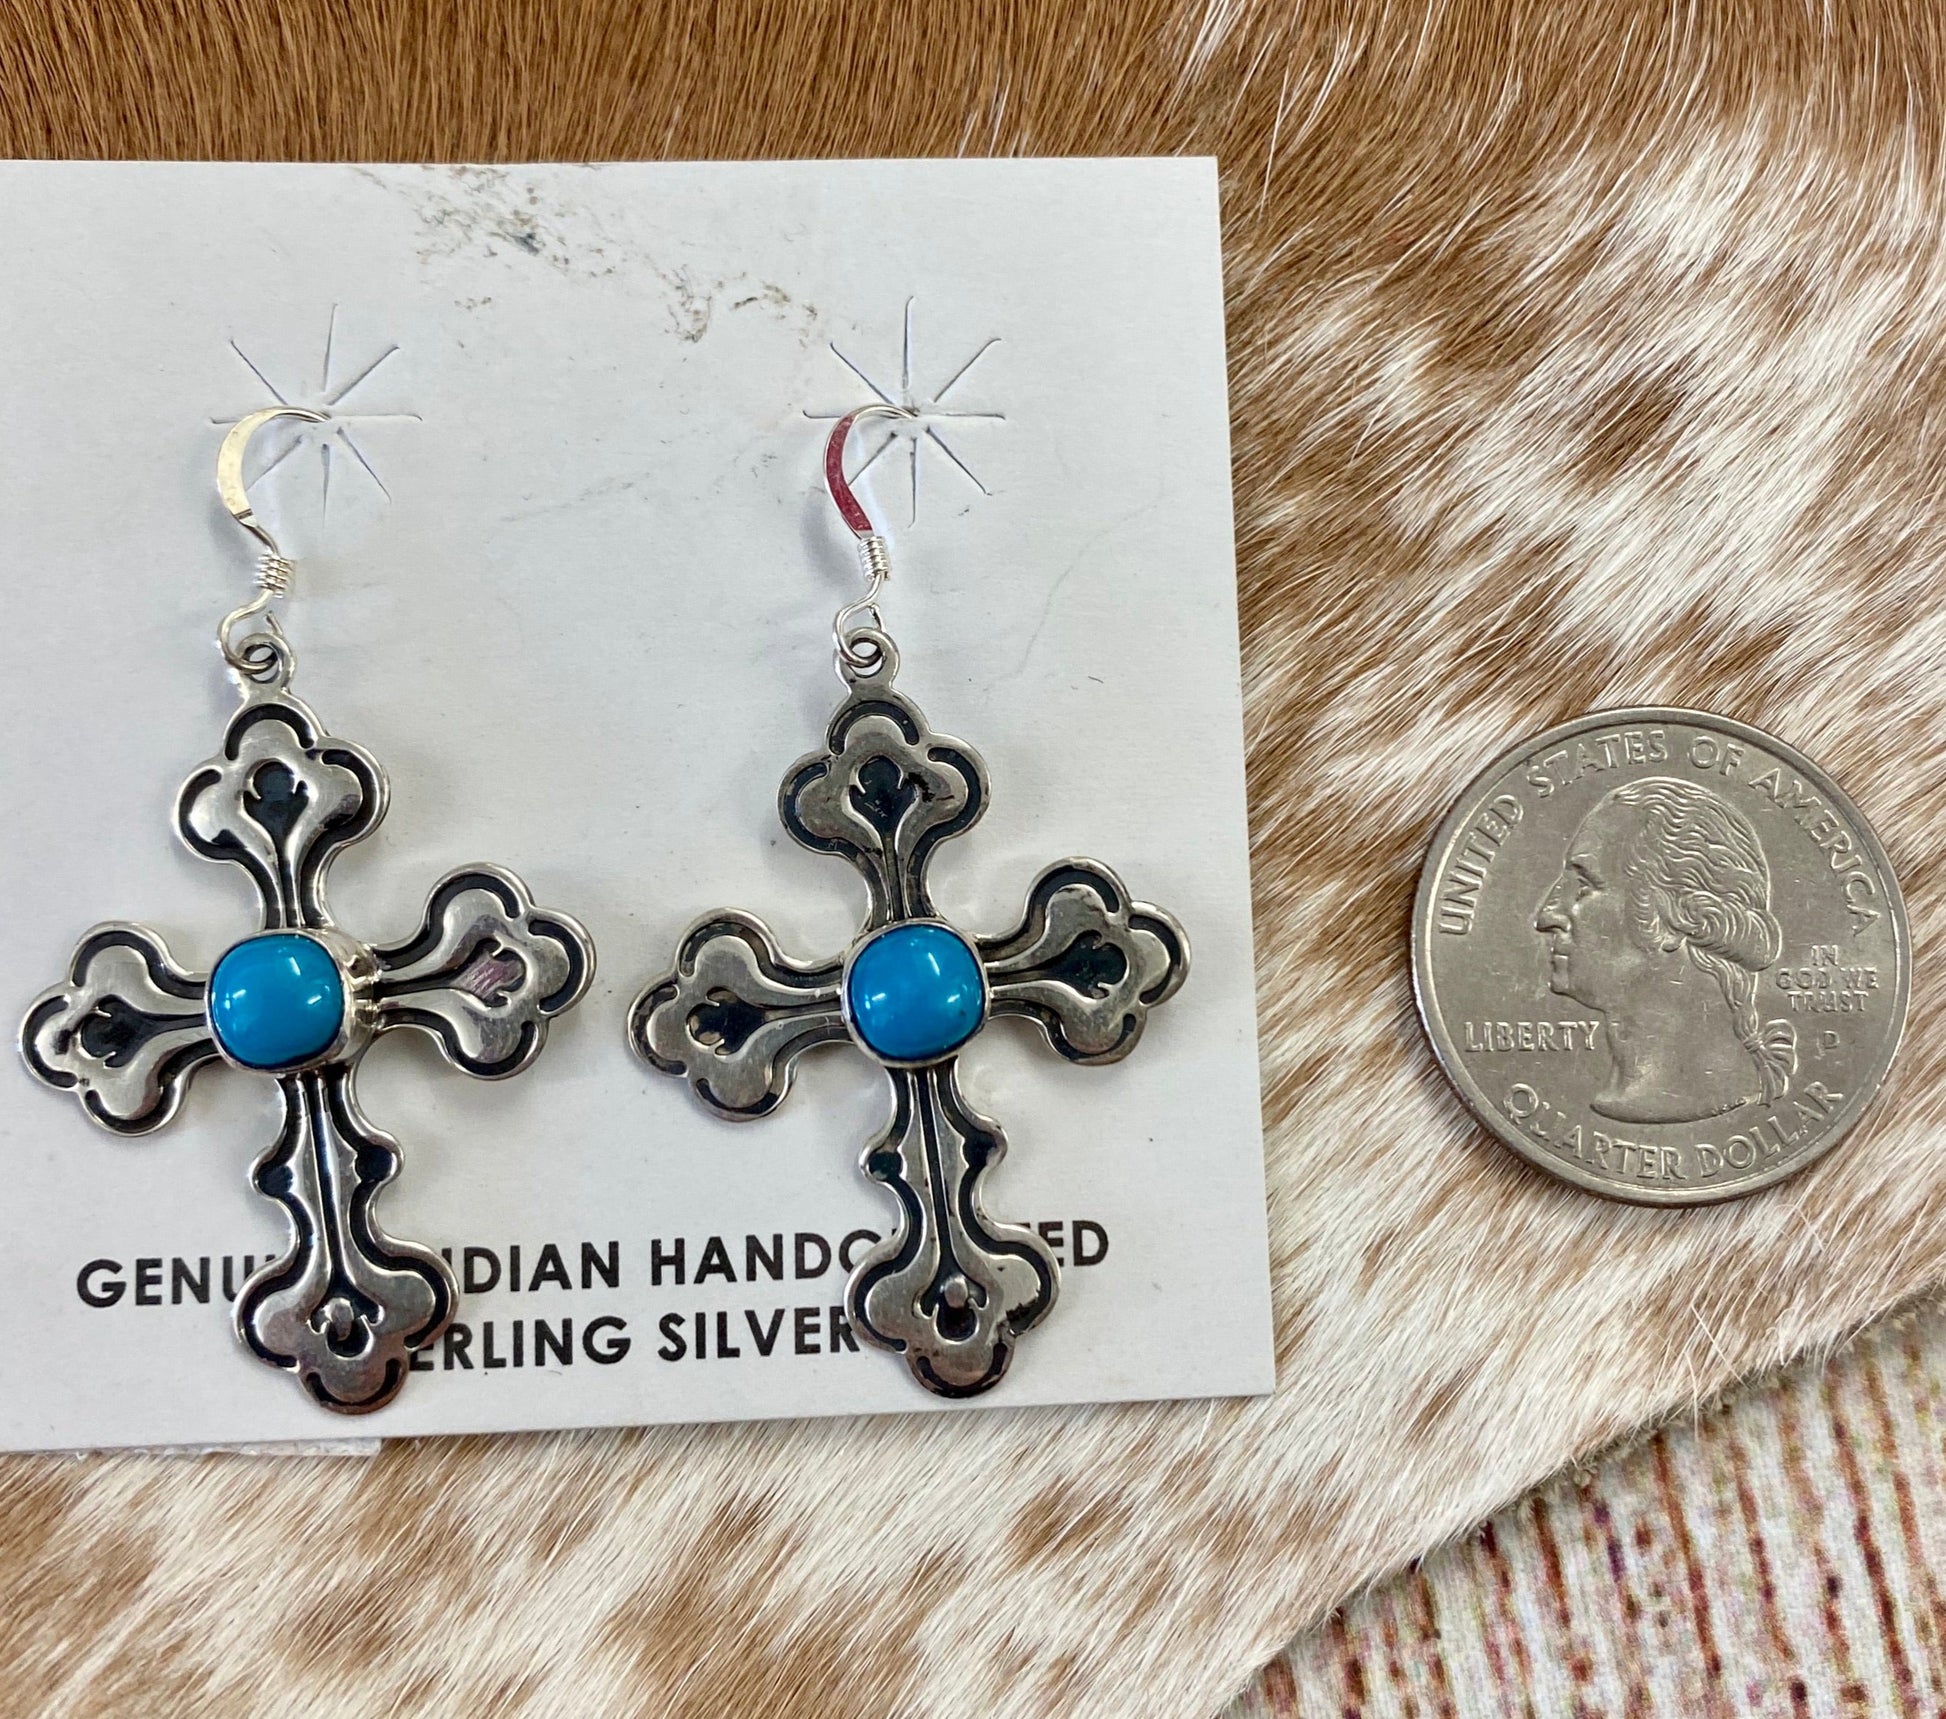 Abel Cross Earrings With Turquoise | Native Made Cross Jewelry Sterling silver Native American handmade cross earrings with turquoise. Stamped .925 and signed G on the back, cross hook lightweight dangle earrings. The perfect gift for the turquoise lover in your life or a beautiful gift for yourself! Size Reference: please see photos of the earrings in size reference next to a quarter.   Size: 1.5" Inch length   Signed: YES "G"   Stone: Turquoise